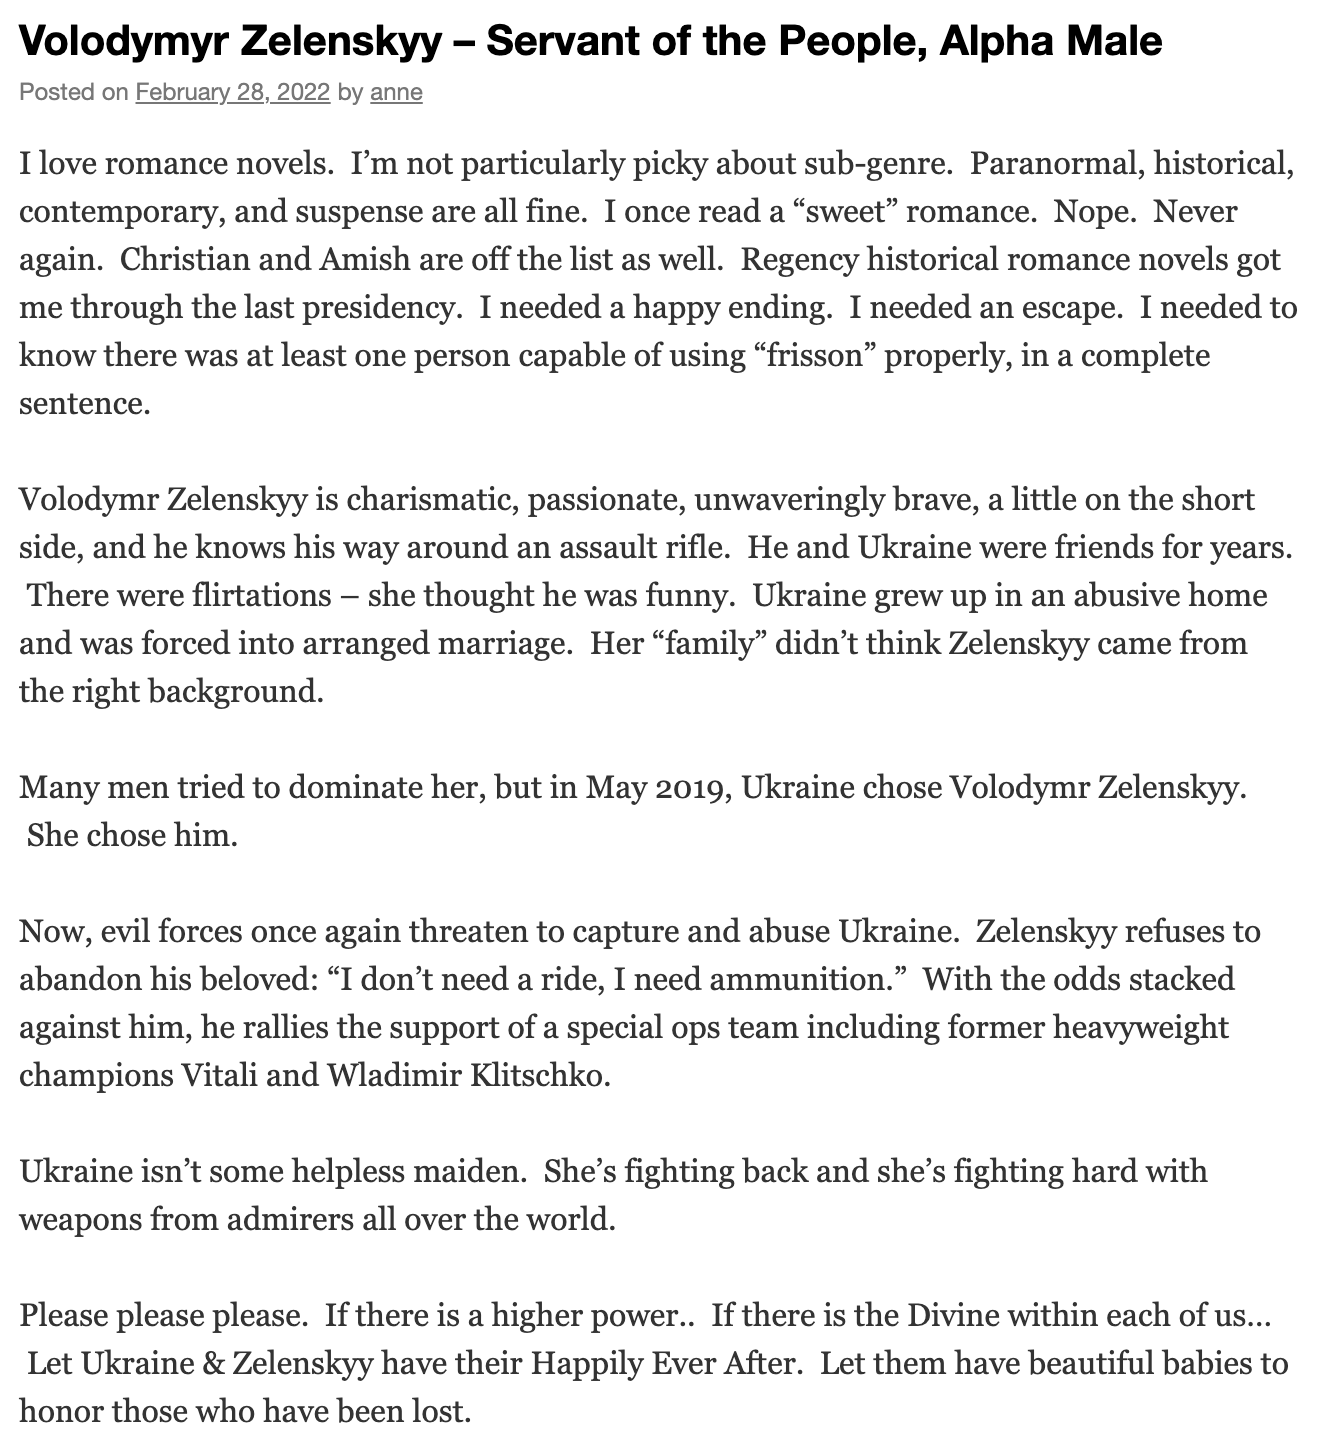 a screenshot of a questionable post about Zelenskyy and Ukraine